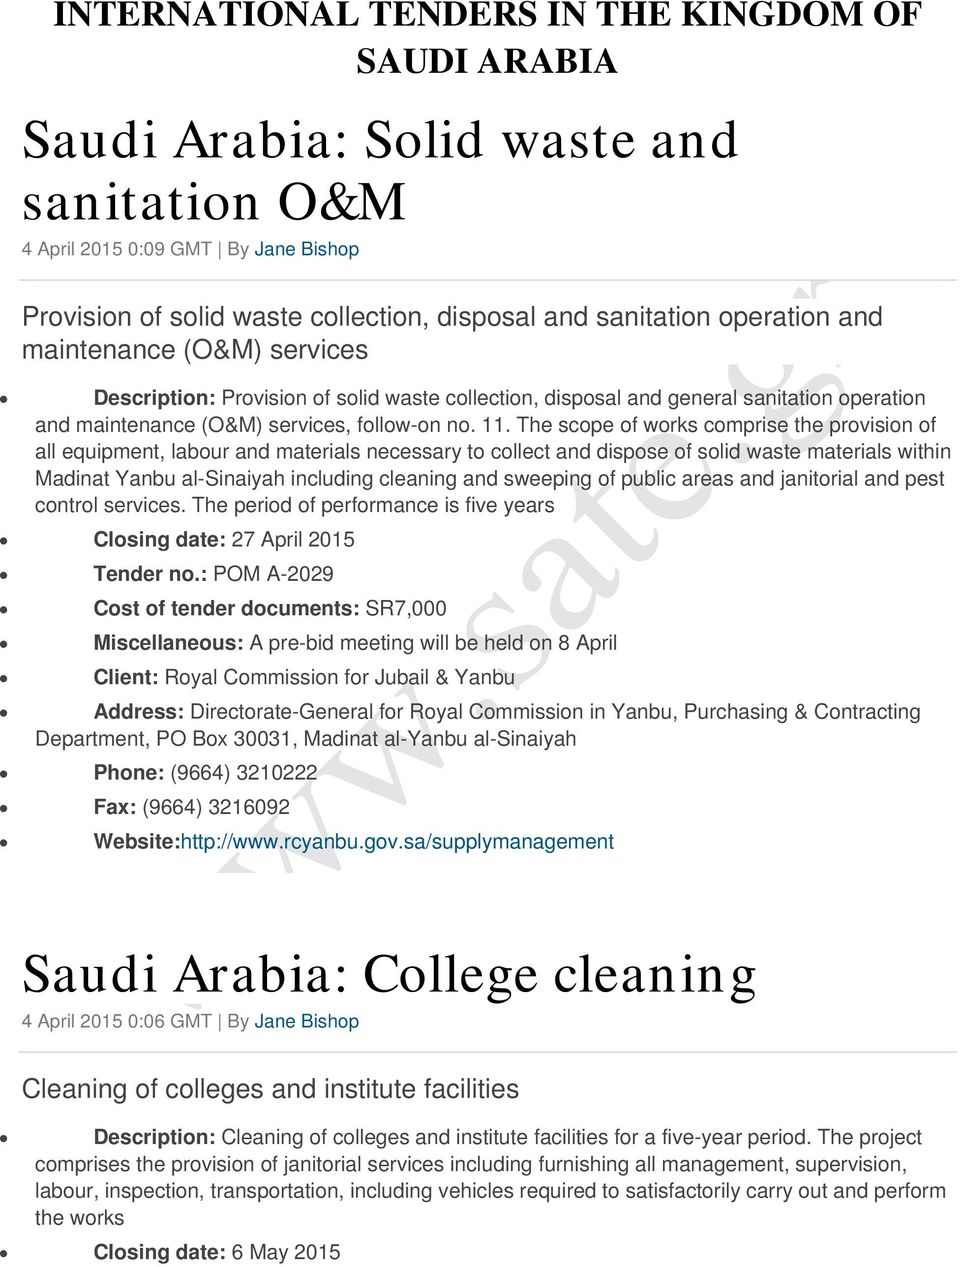 The scope of works comprise the provision of all equipment, labour and materials necessary to collect and dispose of solid waste materials within Madinat Yanbu al-sinaiyah including cleaning and